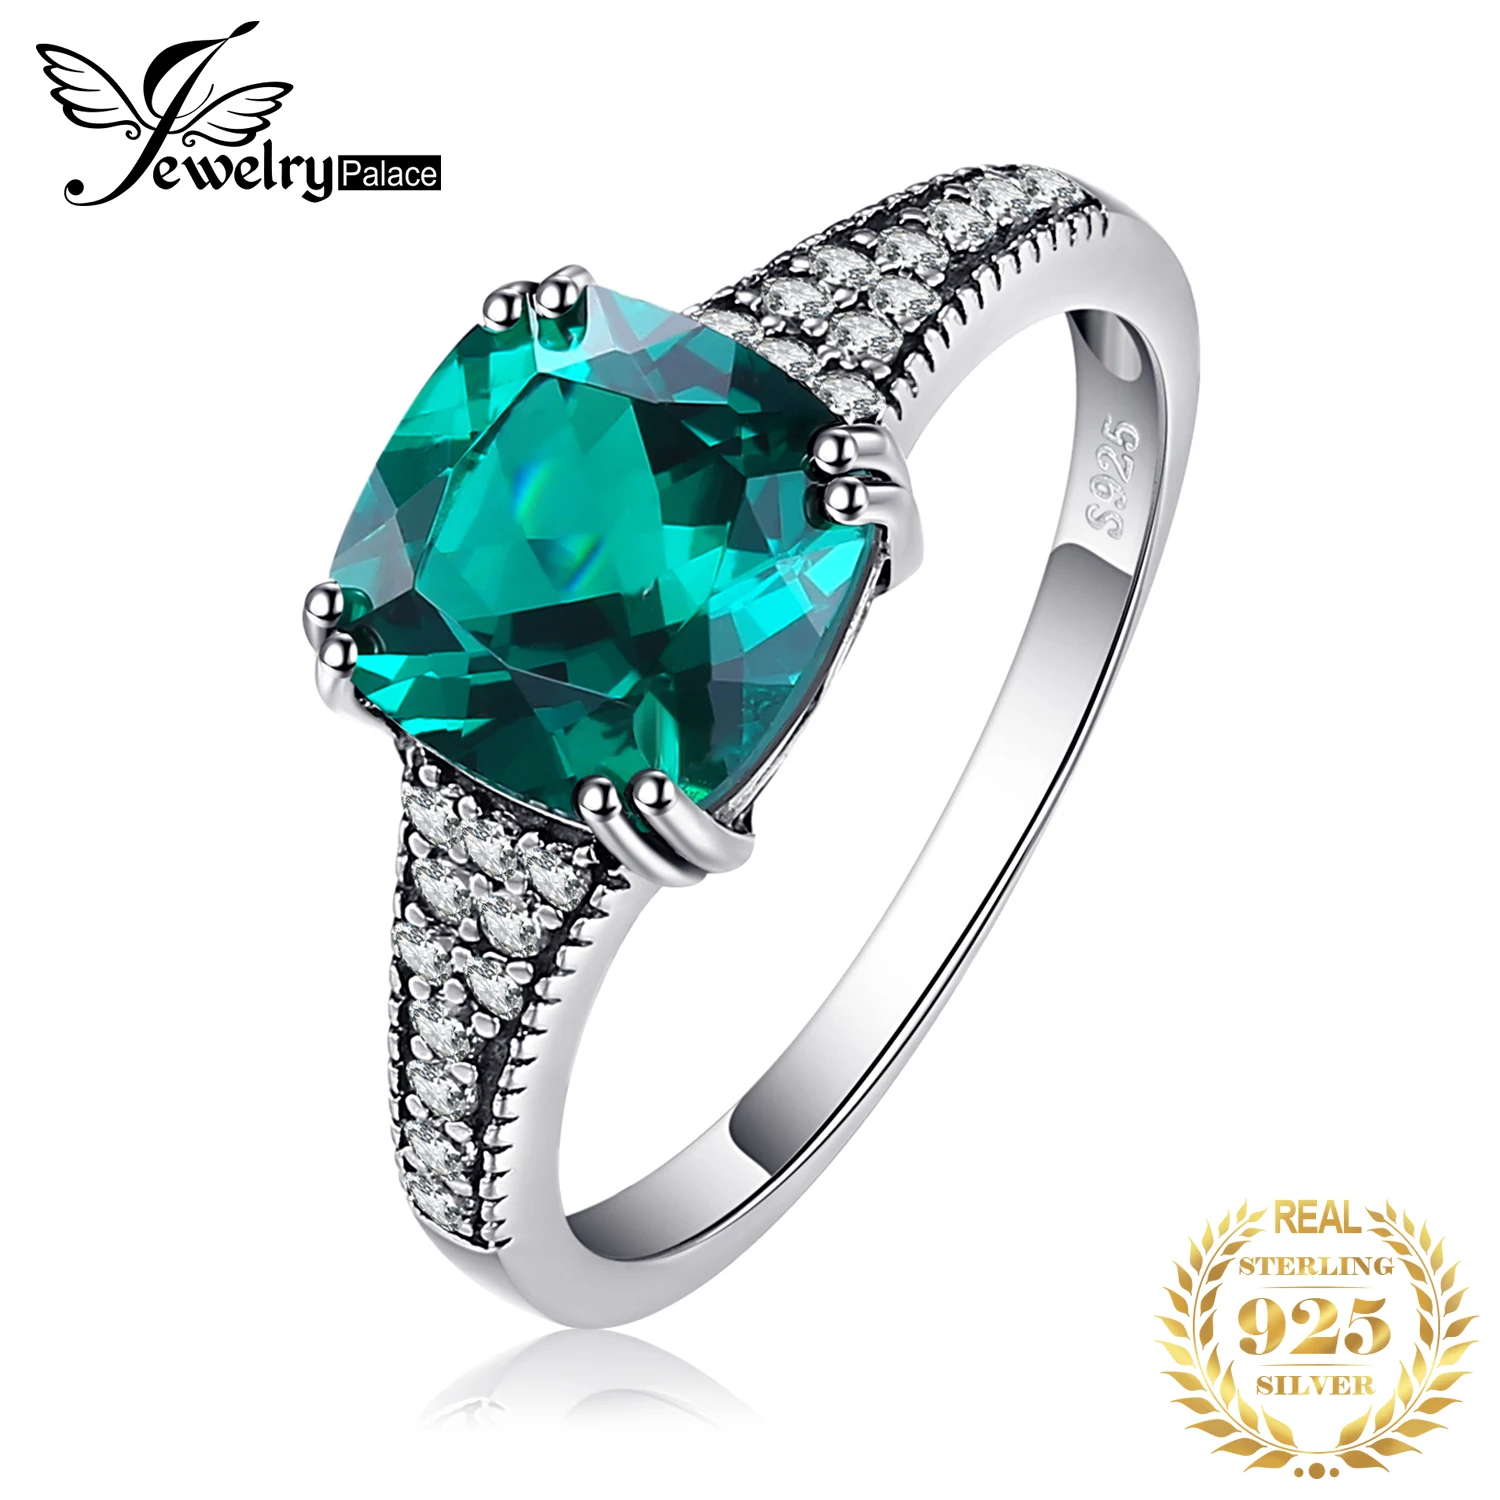 

JewelryPalace Vintage 2.1ct Cushion Simulated Nano Emerald 925 Sterling Silver Engagement Ring for Women Fine Anniversary Gift